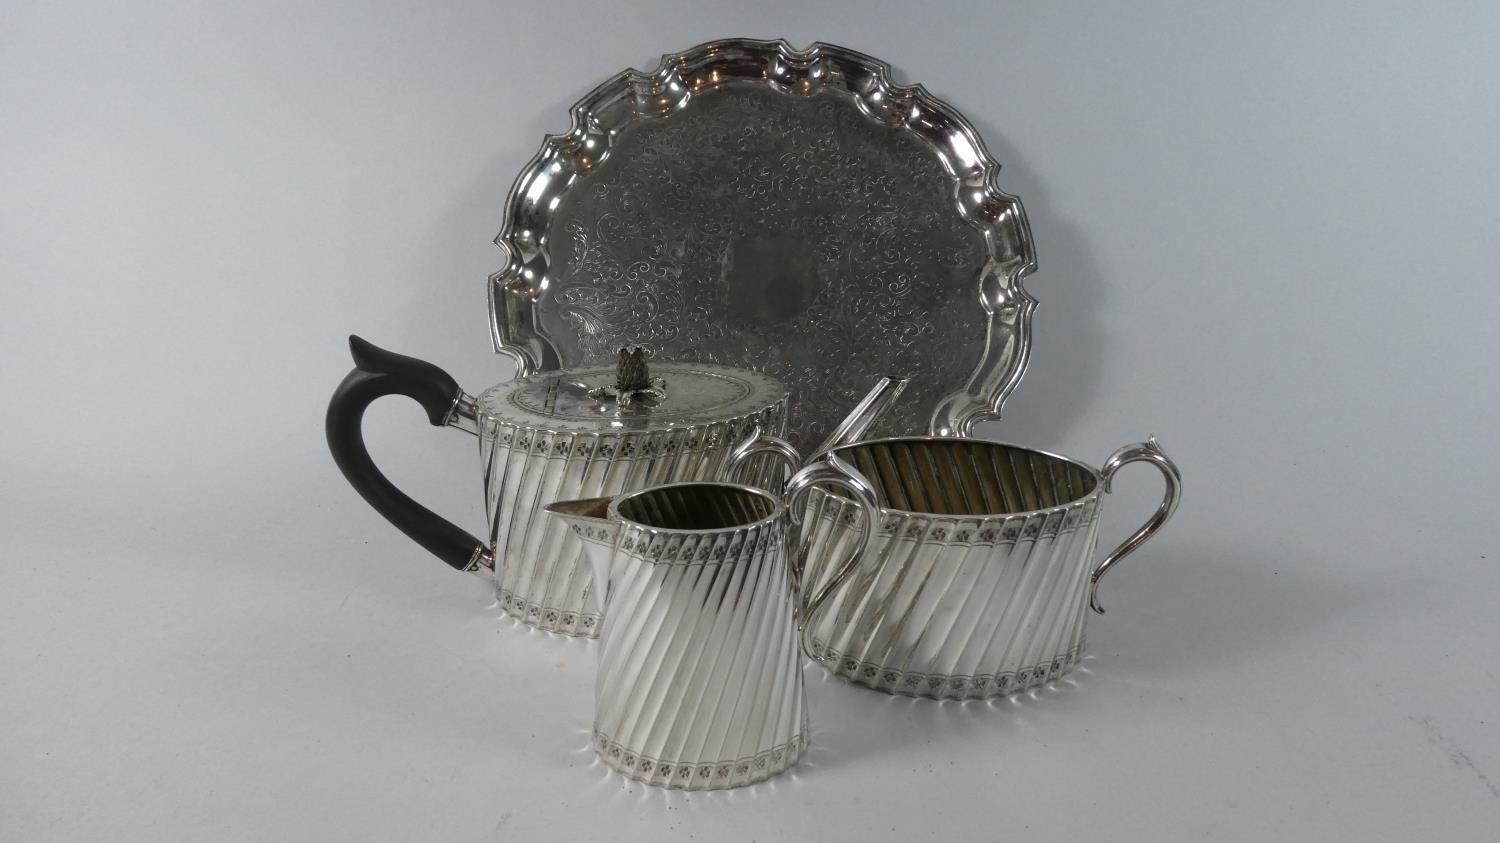 A Silver Plated Reeded Tea Set Comprising Teapot, Milk & Sugar - The Teapot with Pineapple Finial